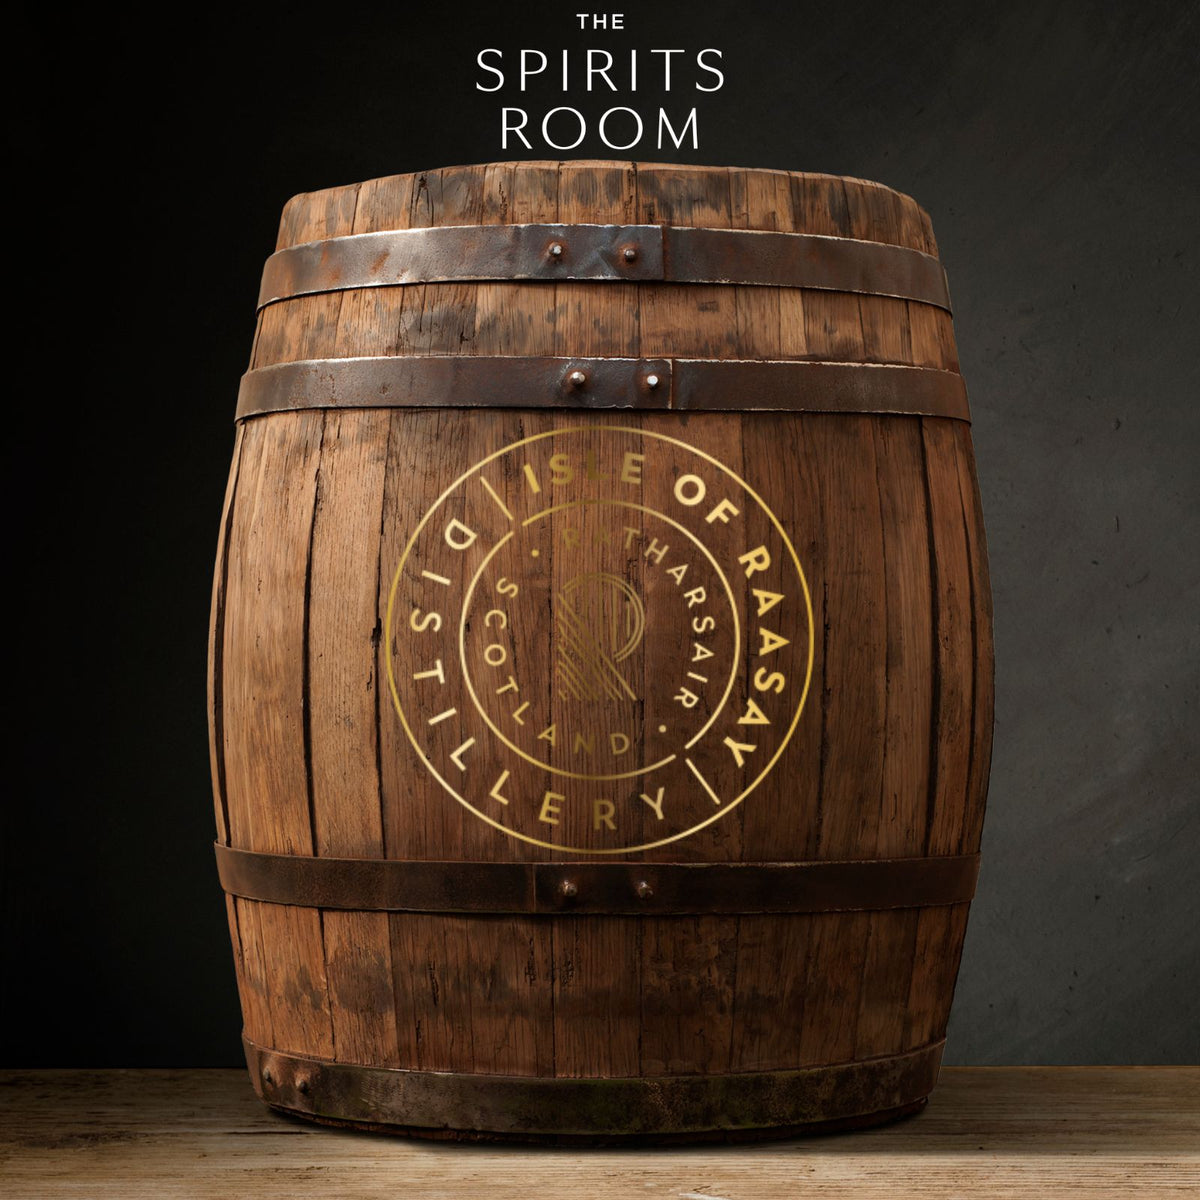 The Spirits Room Exclusive Single Cask Whisky